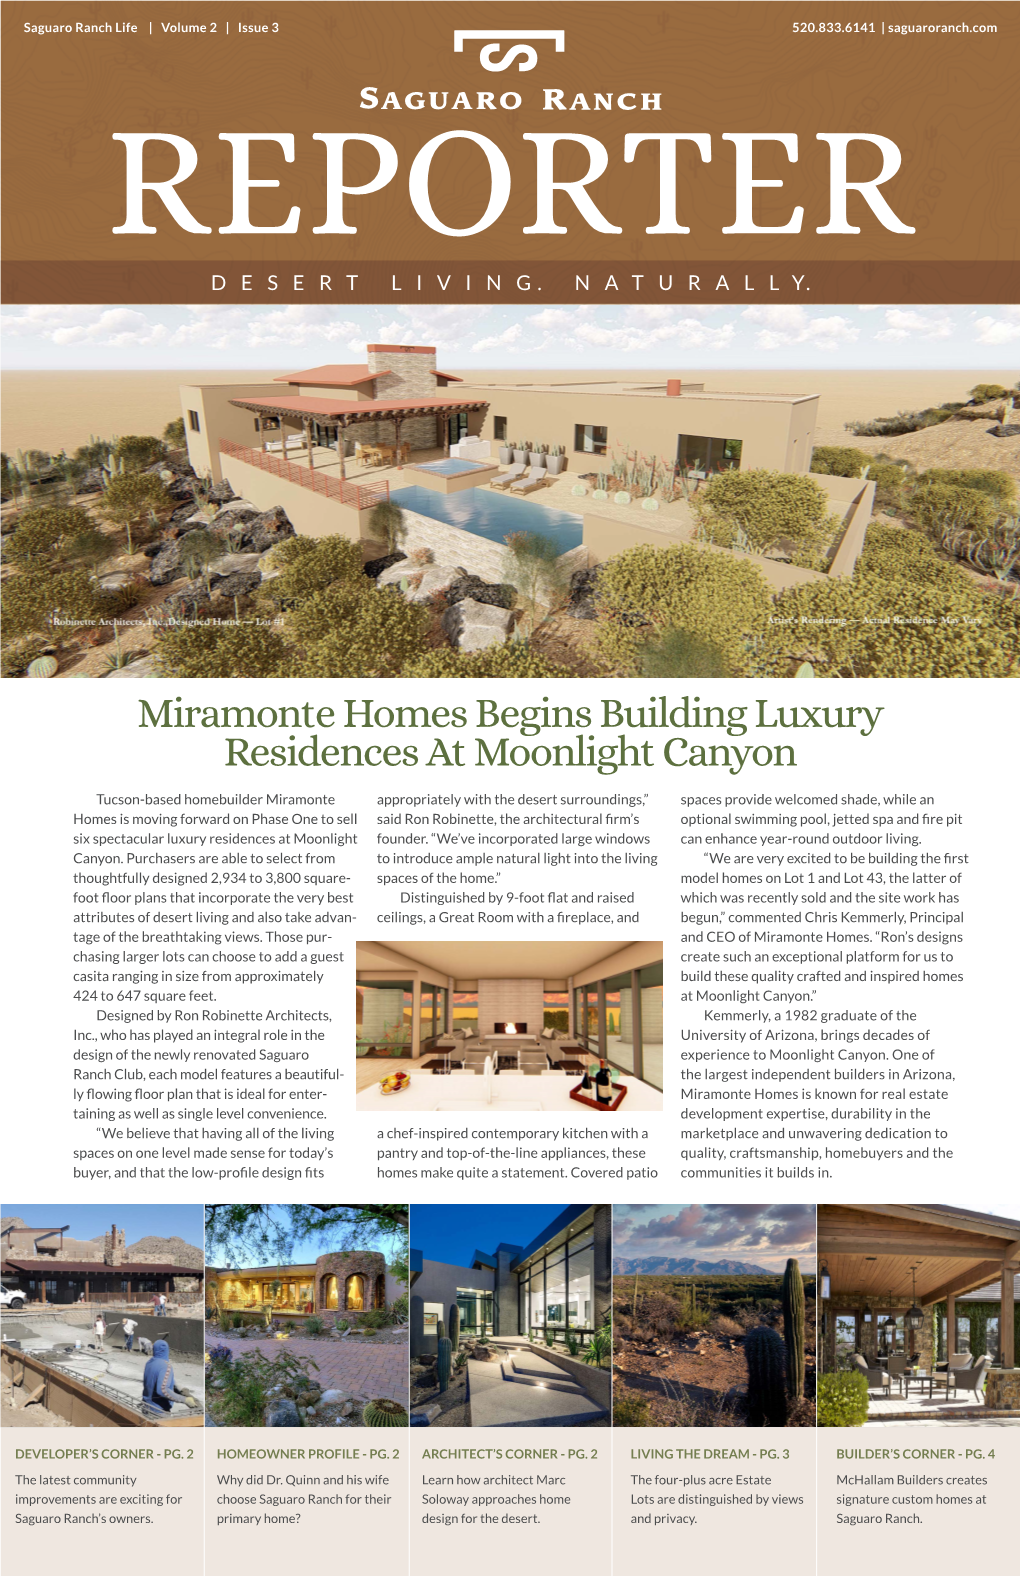 Miramonte Homes Begins Building Luxury Residences at Moonlight Canyon